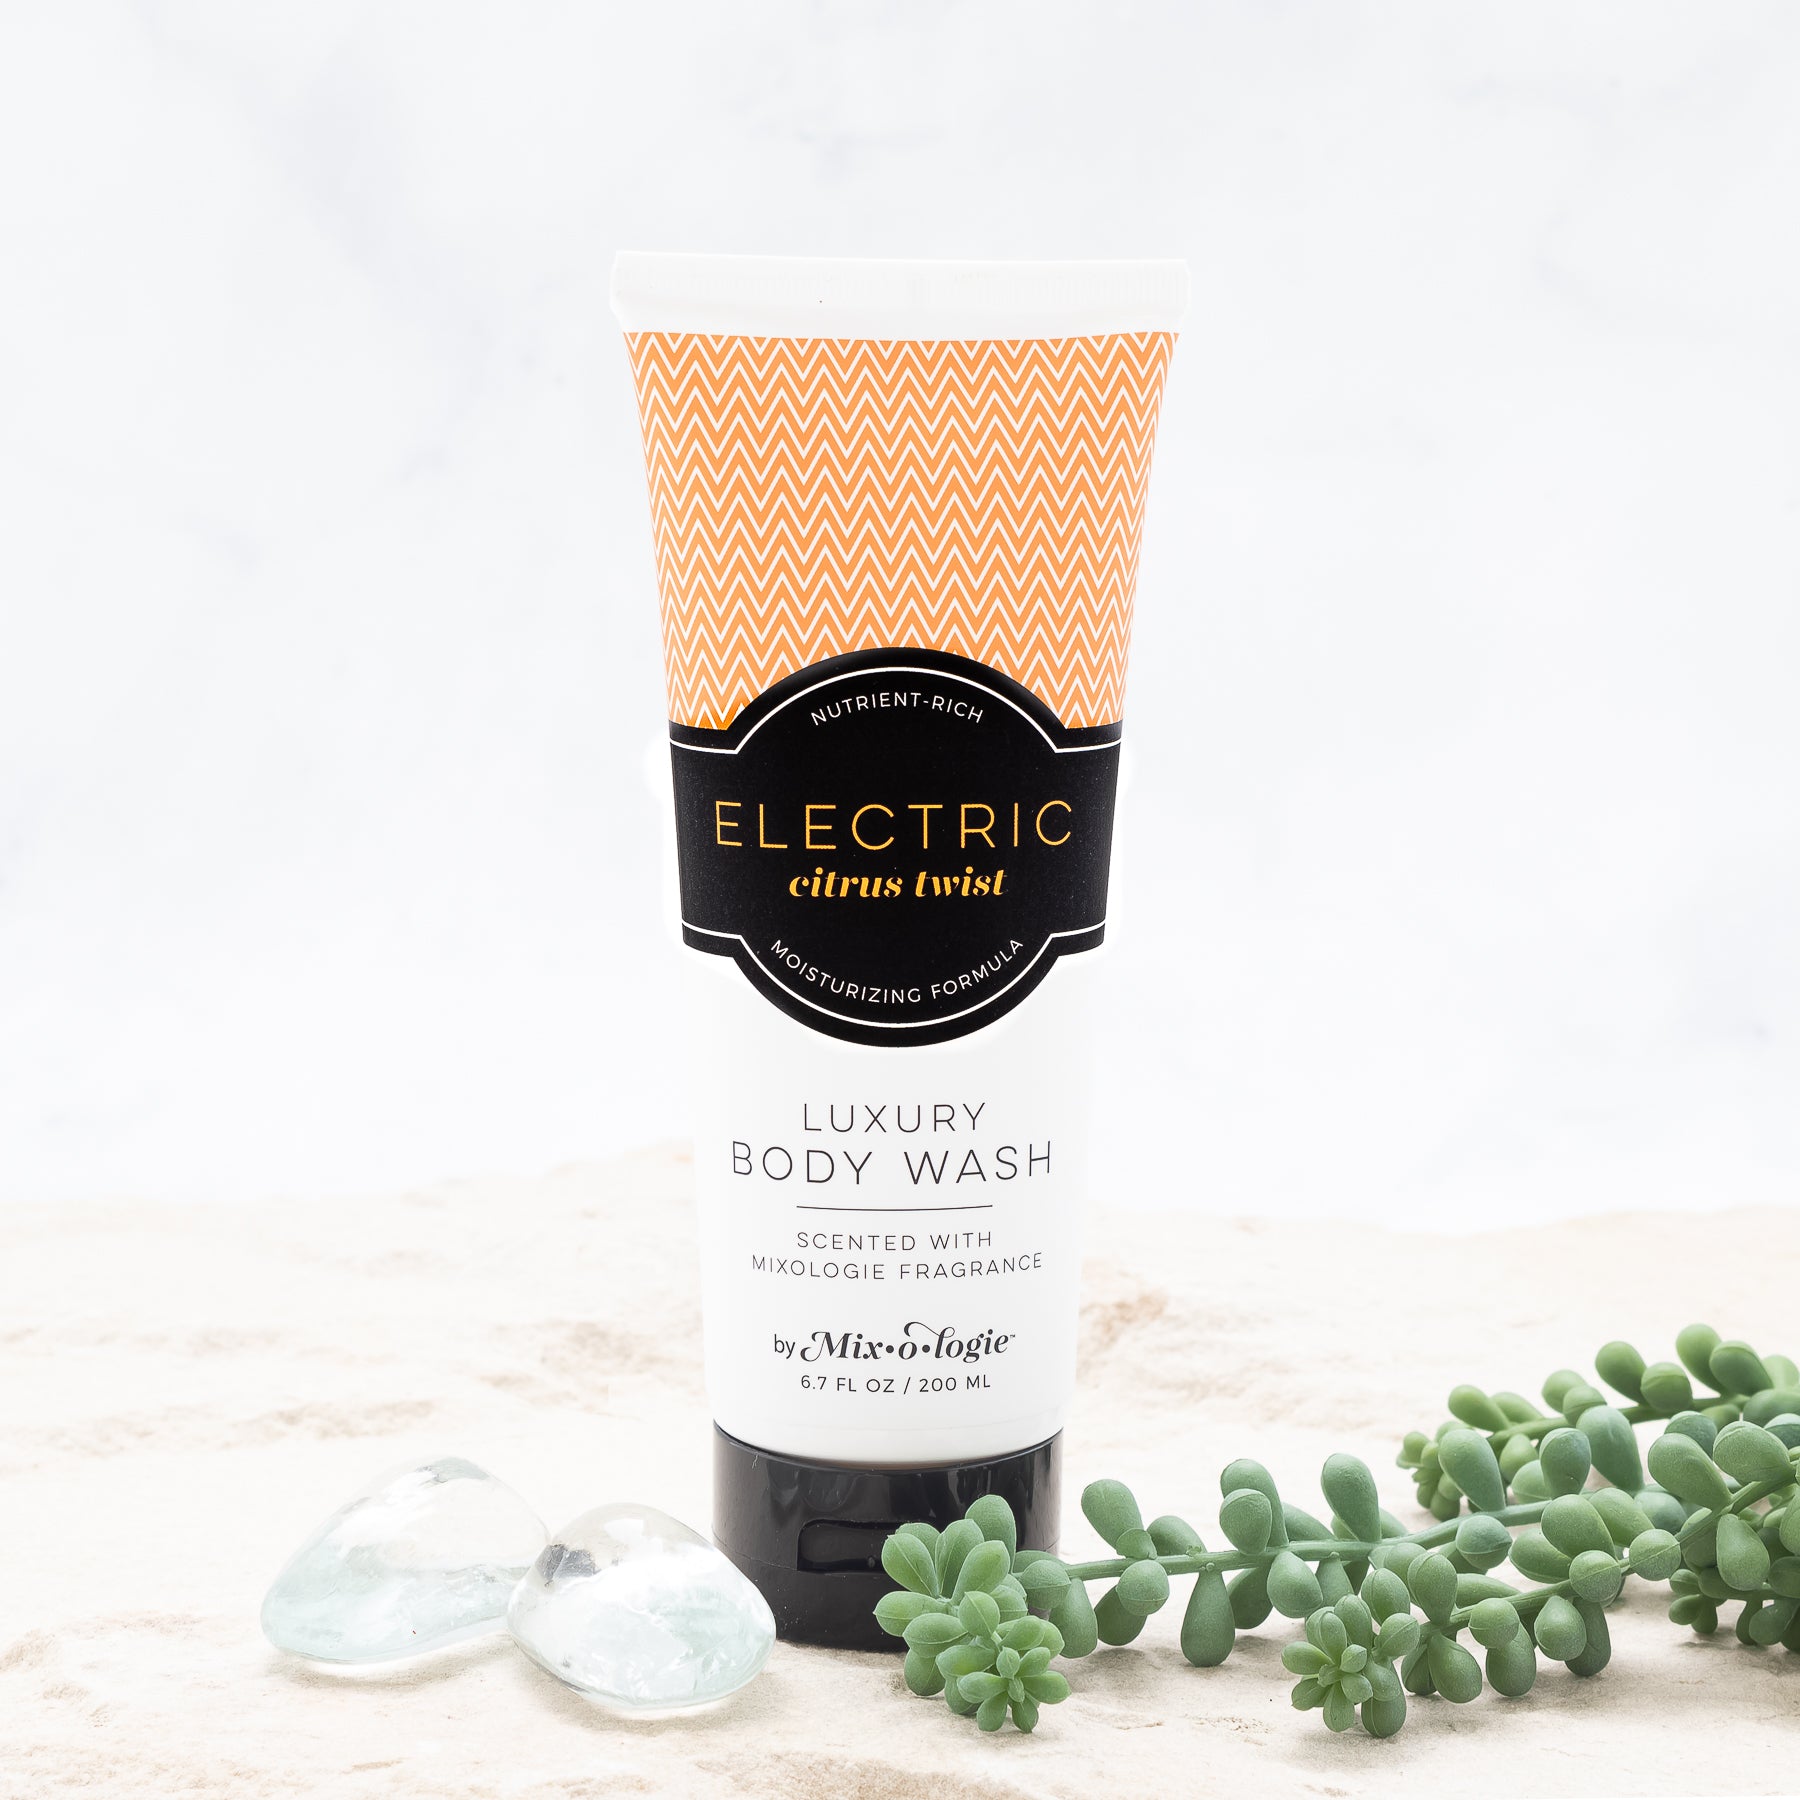 Luxury Body Wash in Mixologie’s Electric (Citrus Twist) in light orange color sample package with black label. Contains 6.7 fl oz or 200 mL pictured on a white background. 